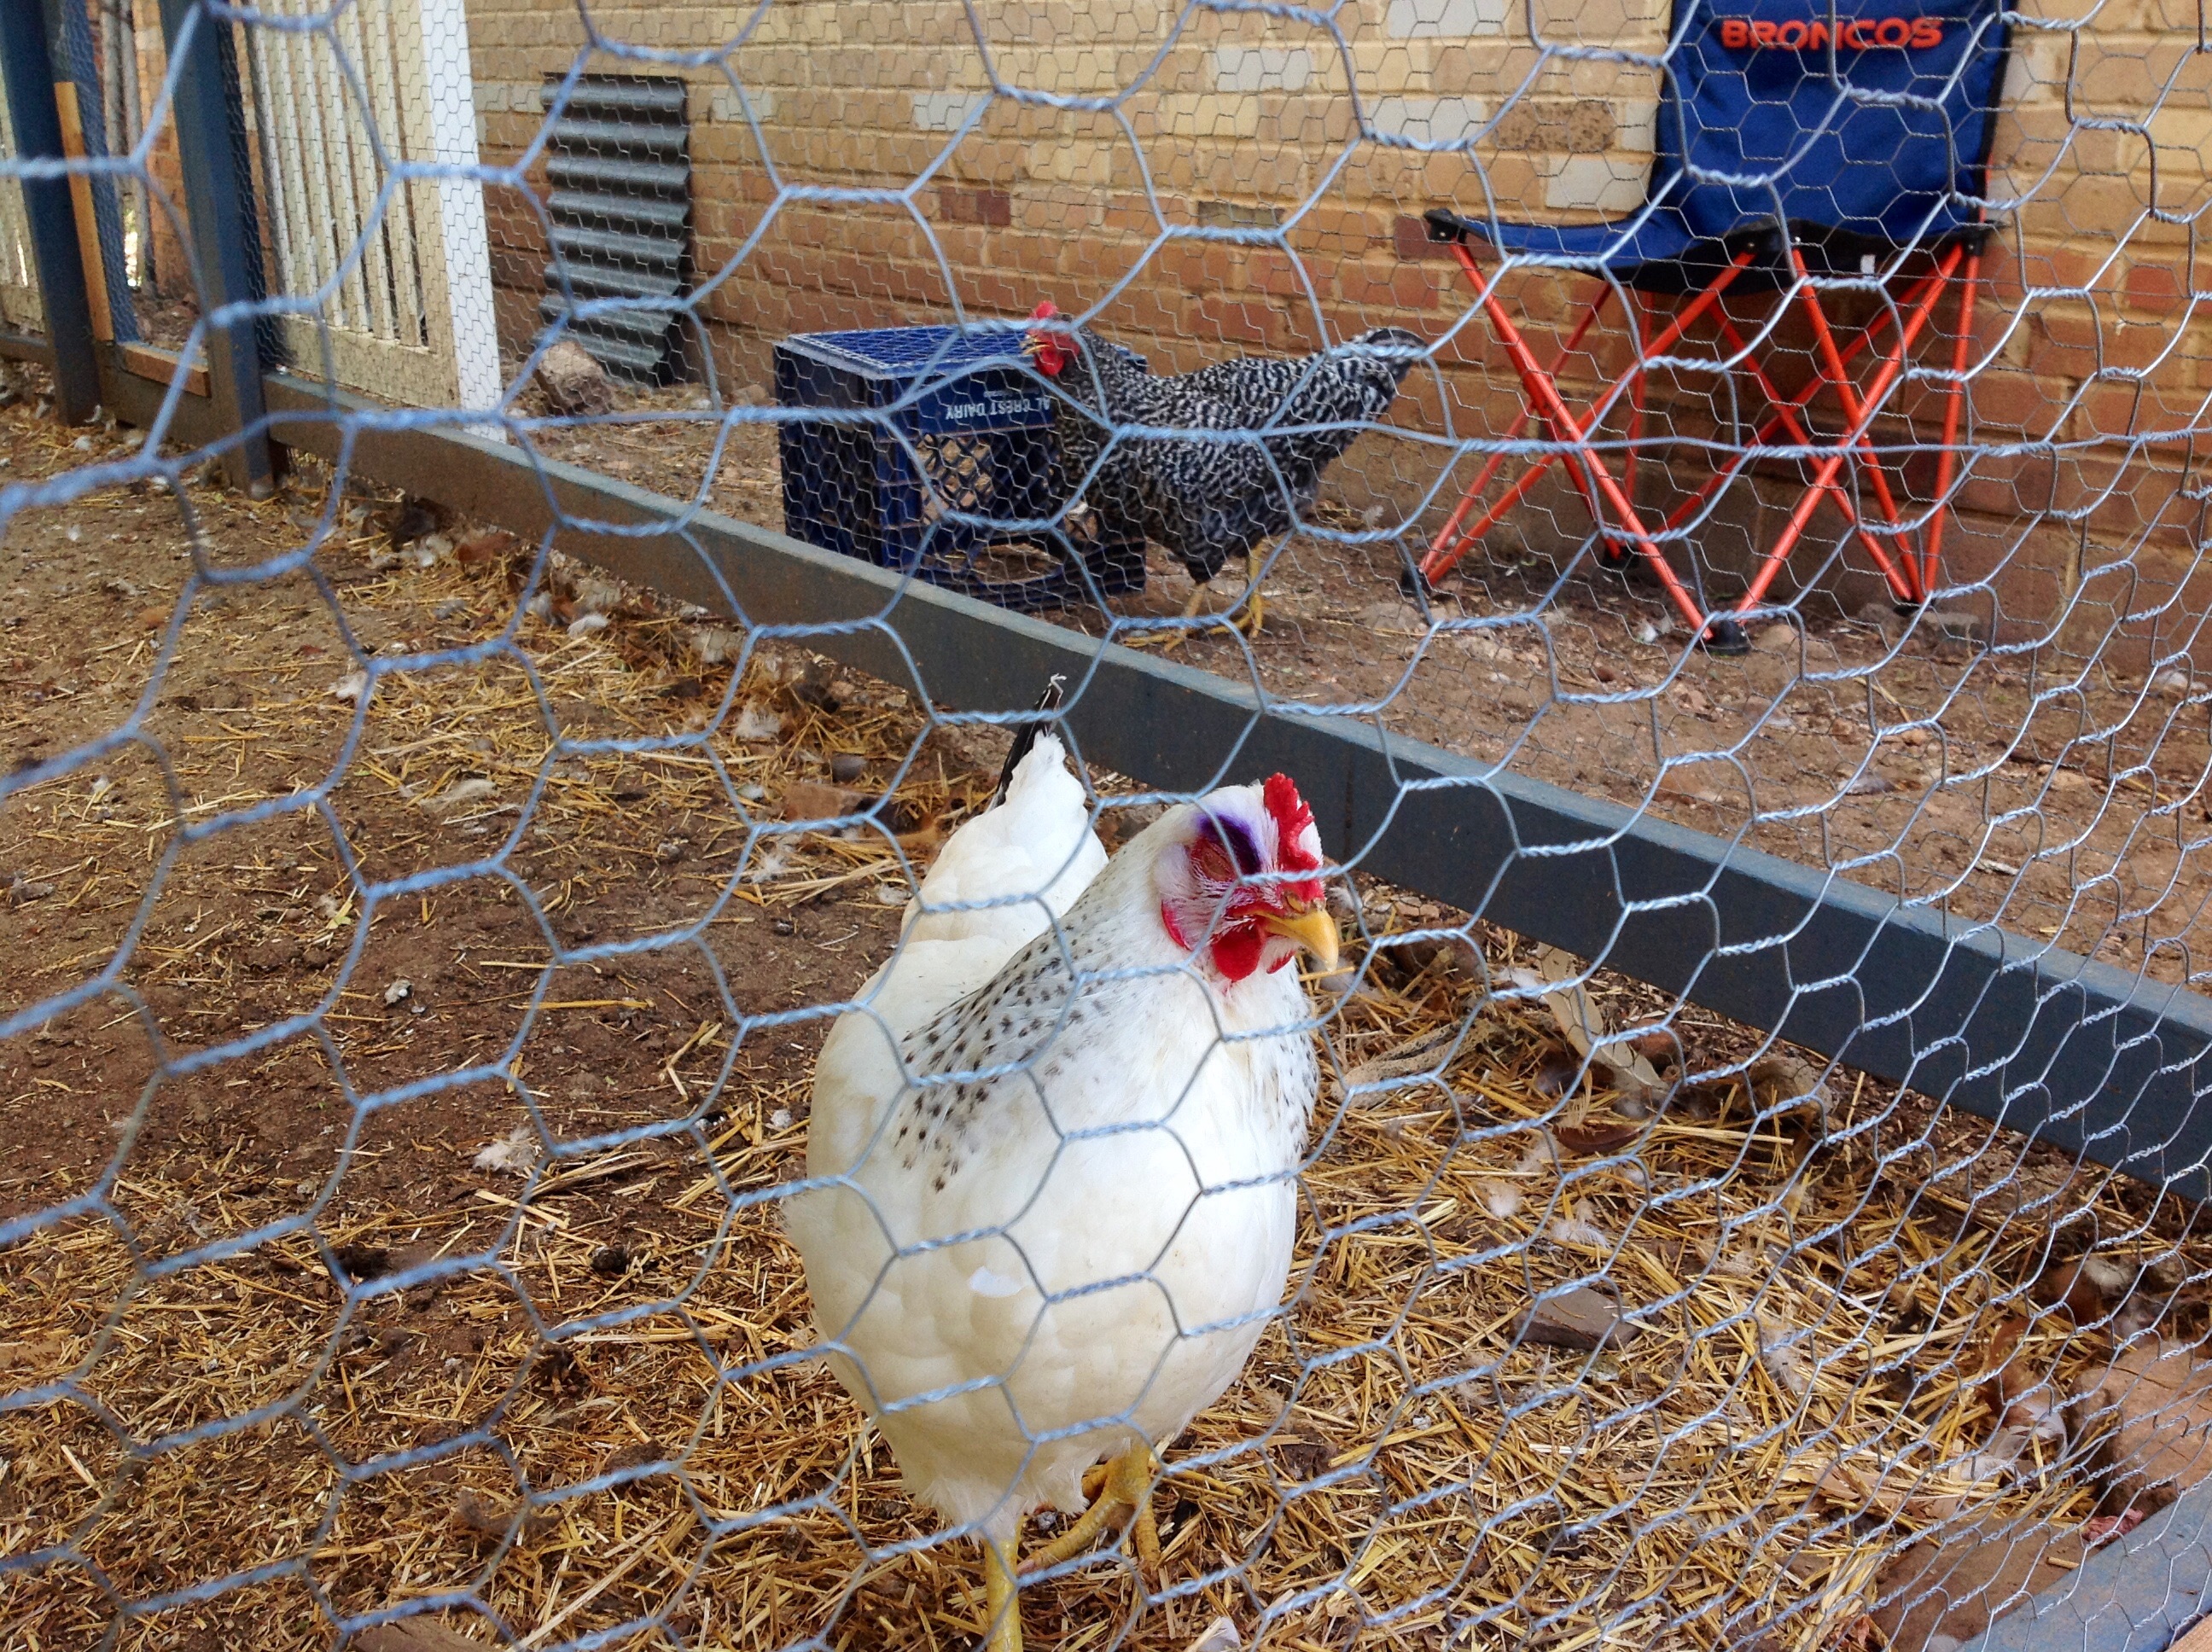 Left Eye - we have two coops in the enclosed run, one large (main coop) and one small. We were able to keep her in the enclosed run during the day while the flock was free ranging and then she went to small coop at night and the flock in the main coop.